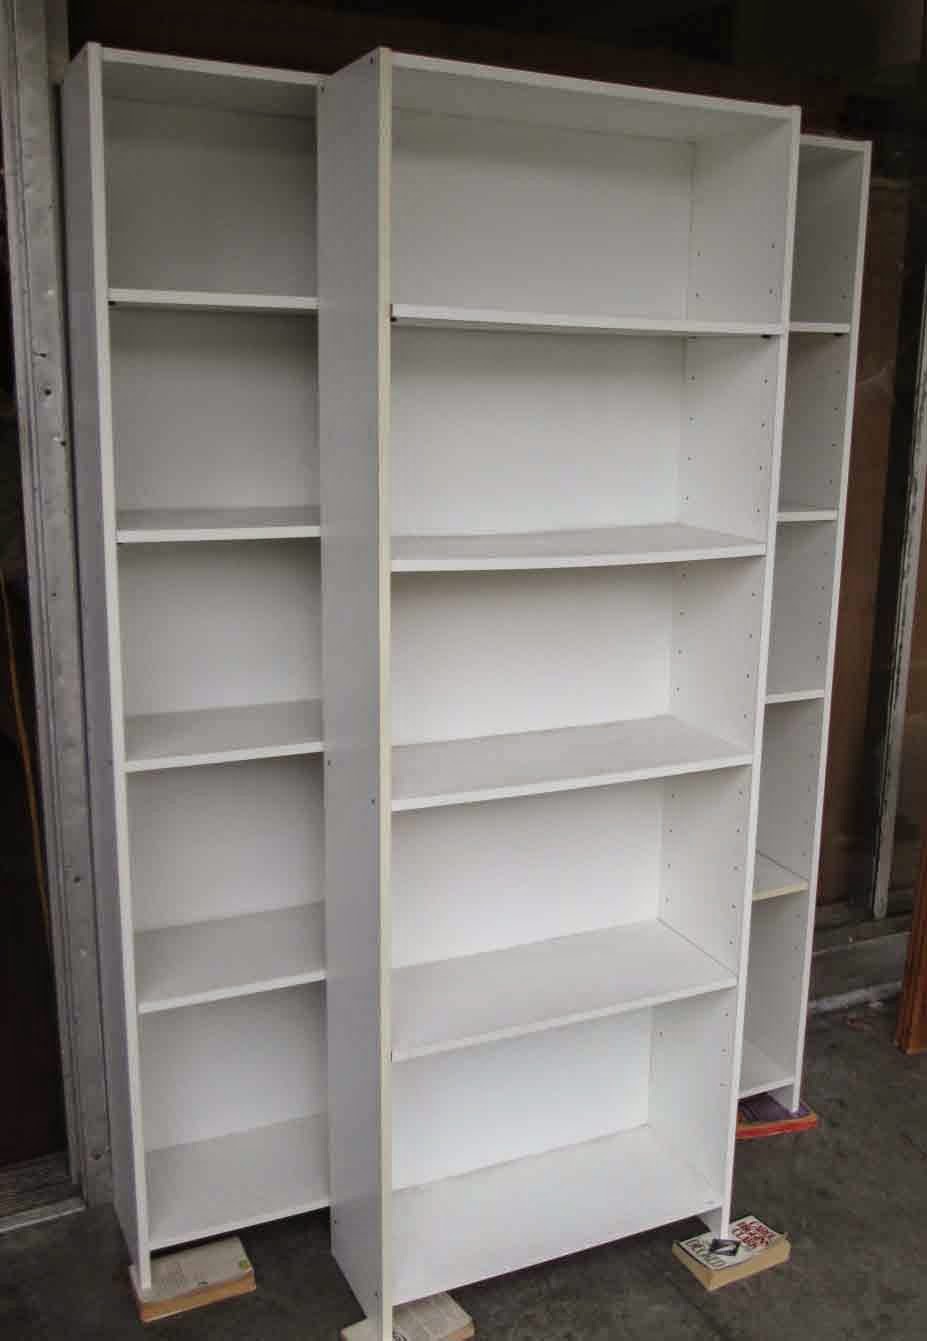  Tall Narrow Bookcase White with Simple Decor